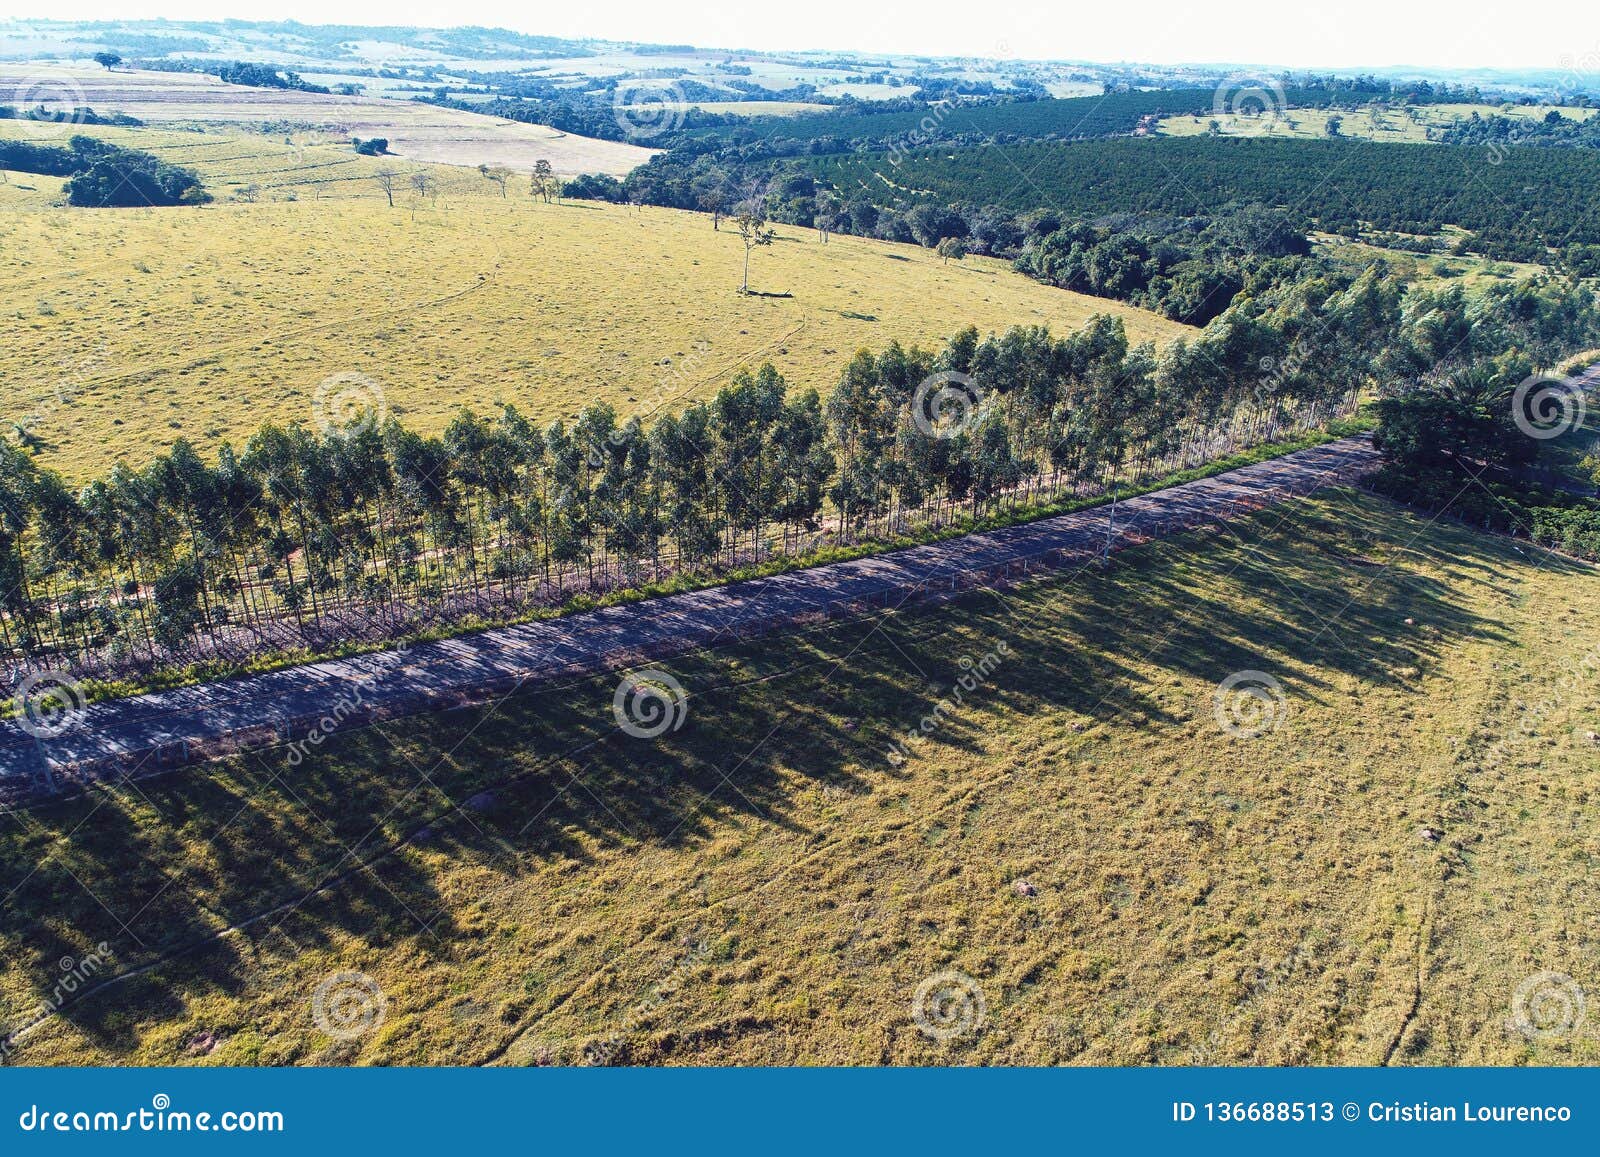 aerial view of rural scene and beautiful landscape.